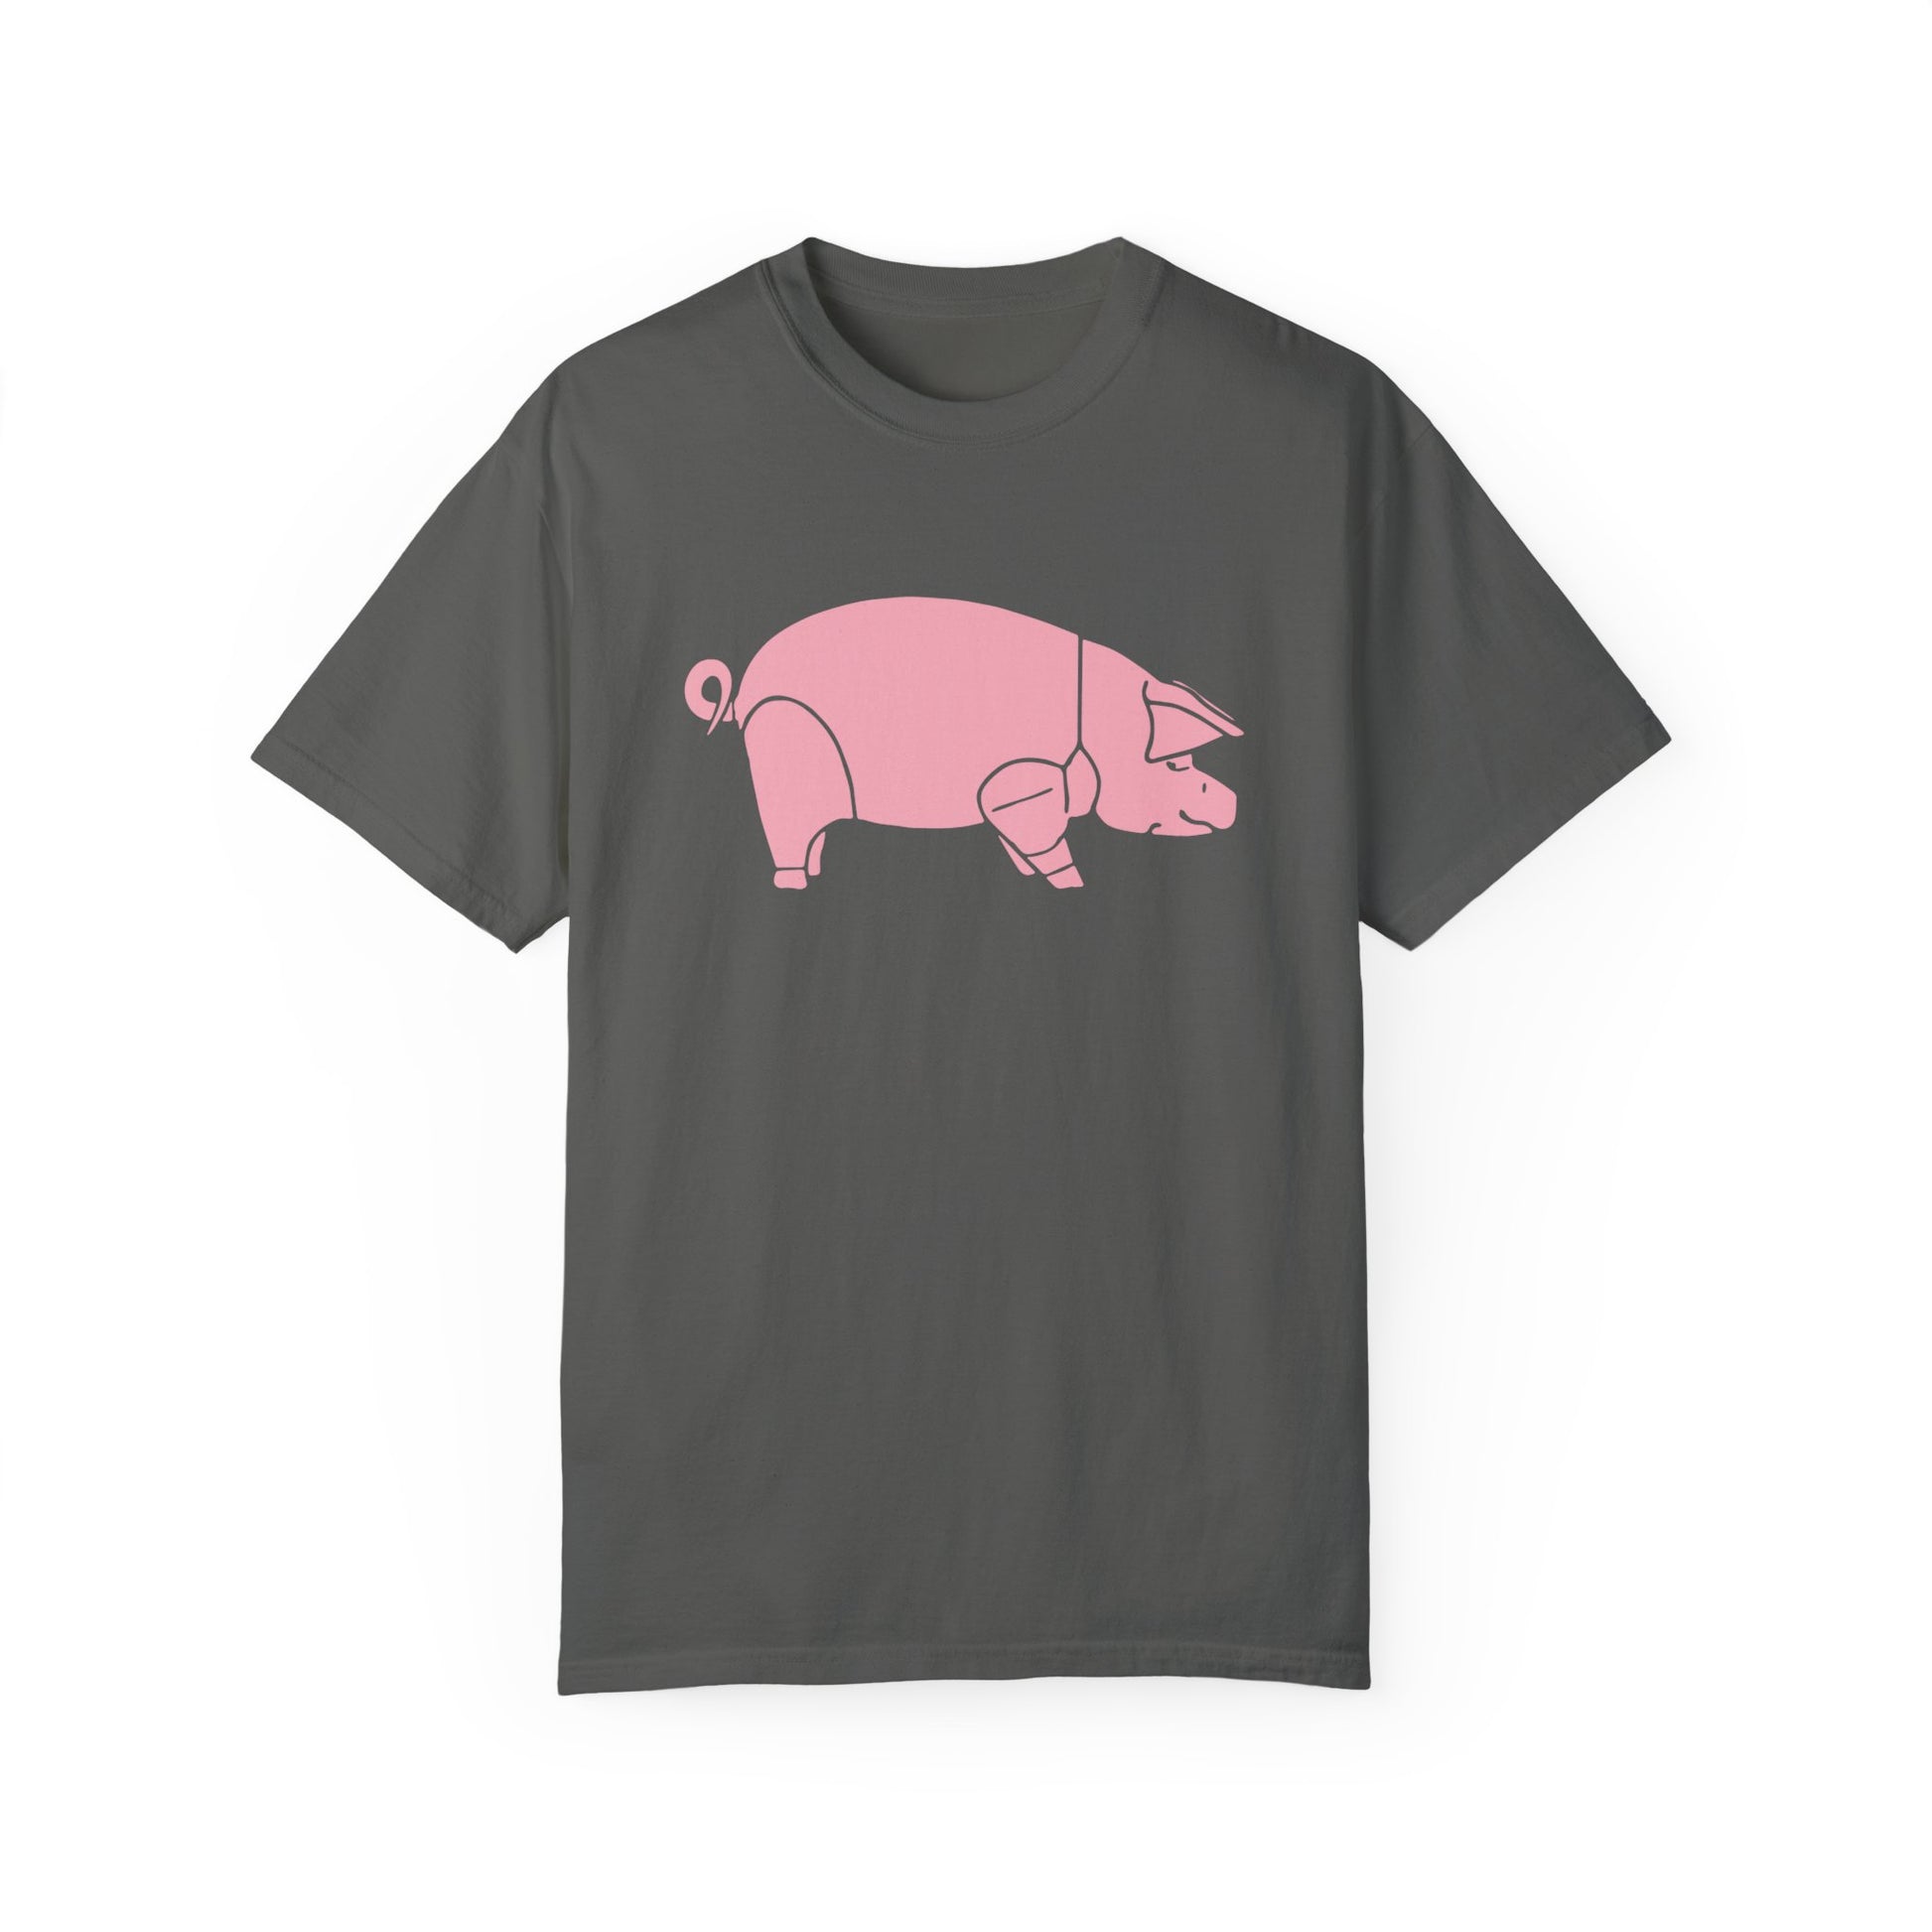 Graphic pink pig on a grey pepper T-shirt.